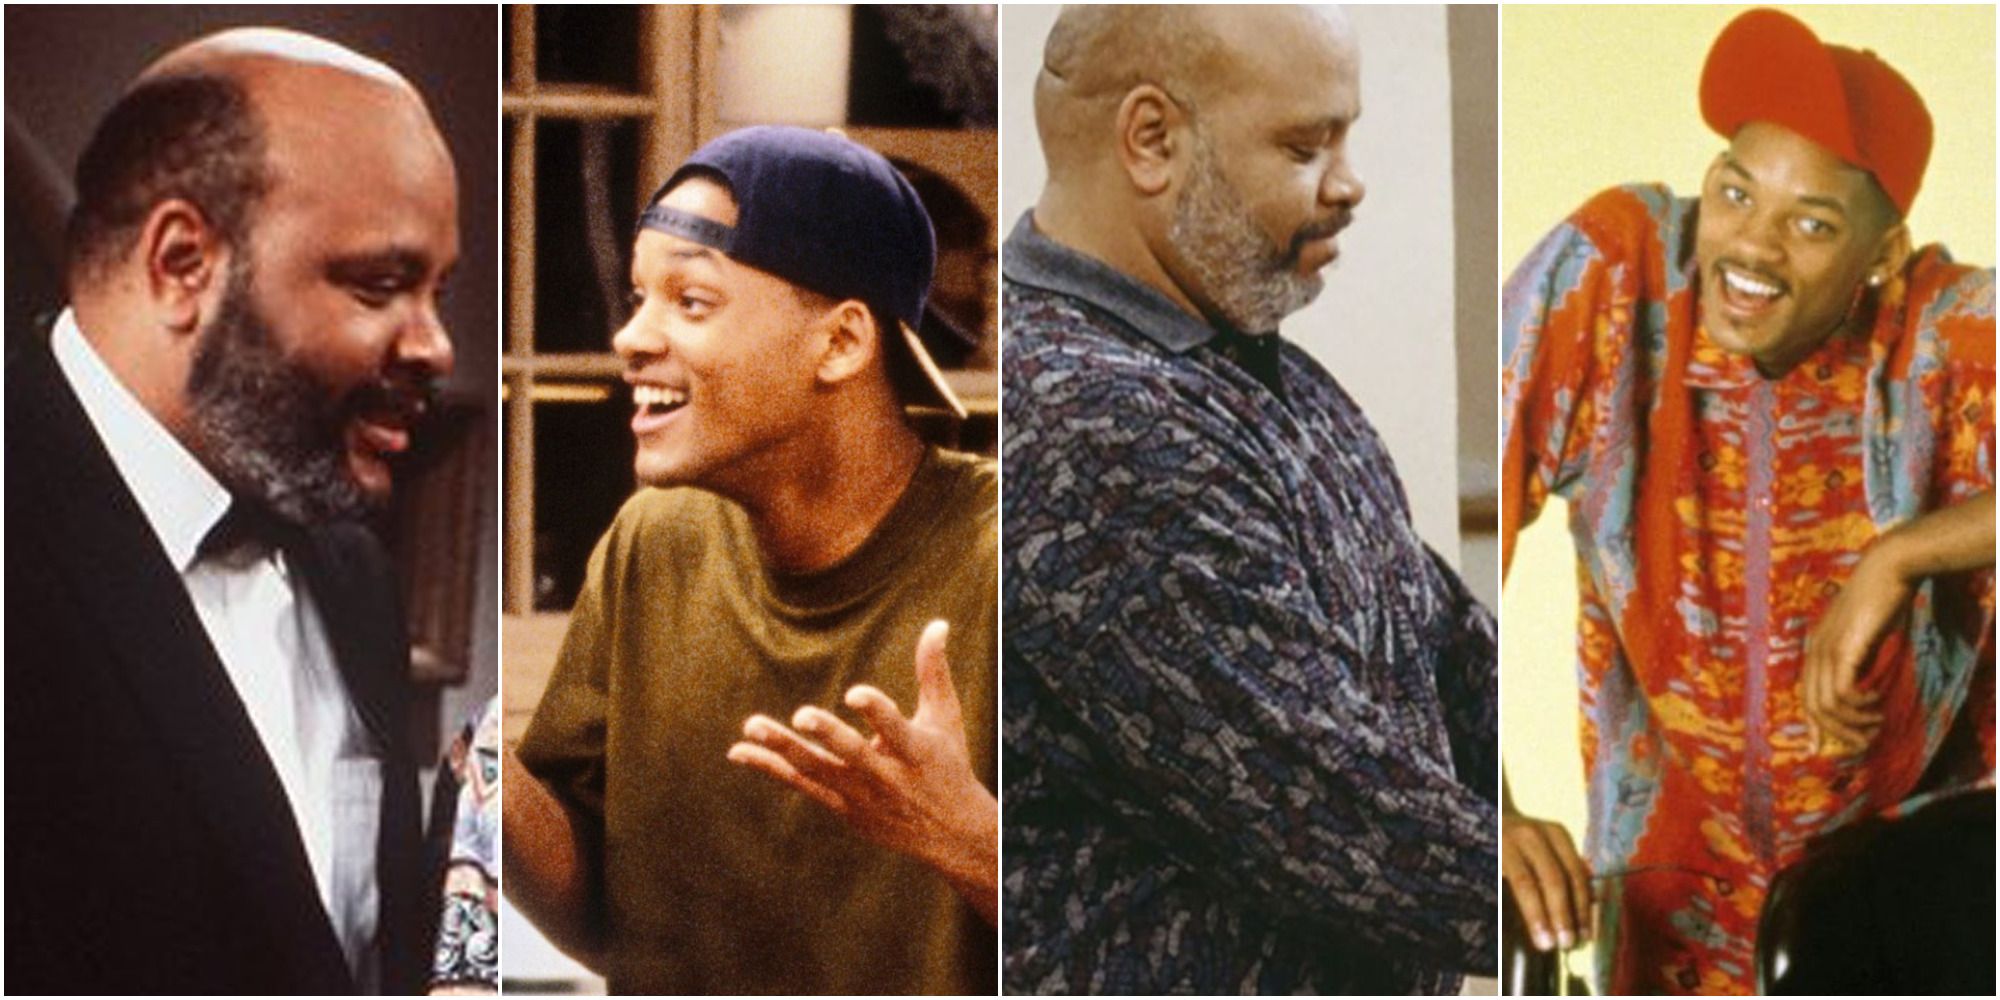 fresh prince of bel air episodes will